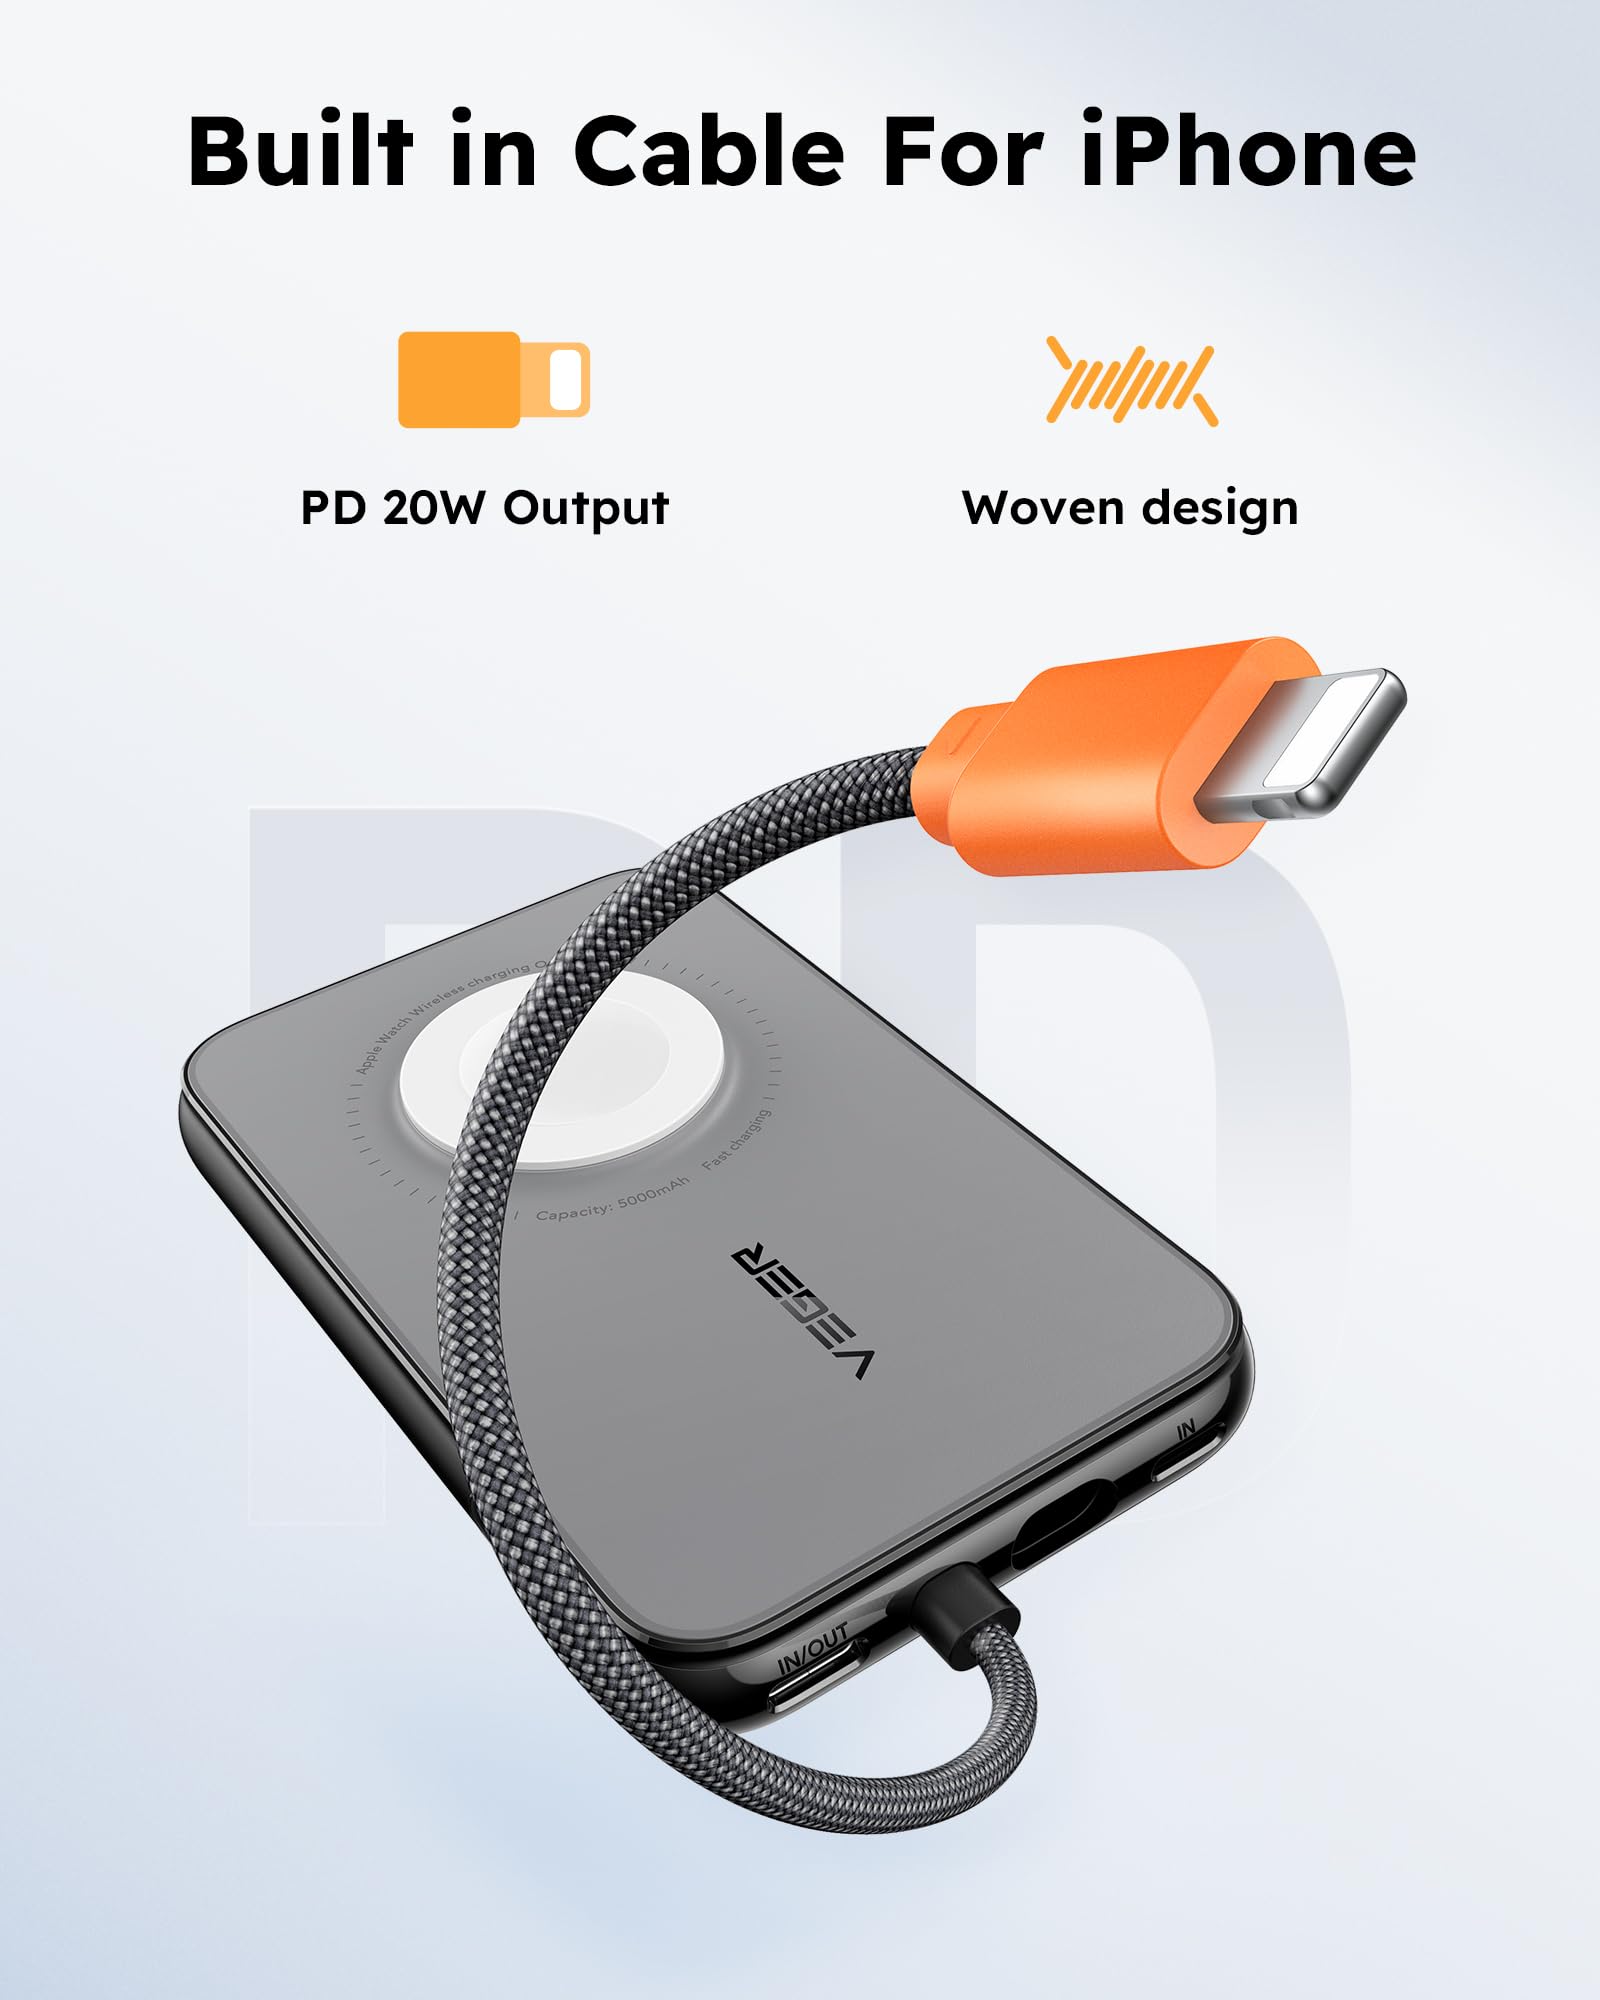 V0567 5,000mAh Portable Charger for iPhone with Built in Cable